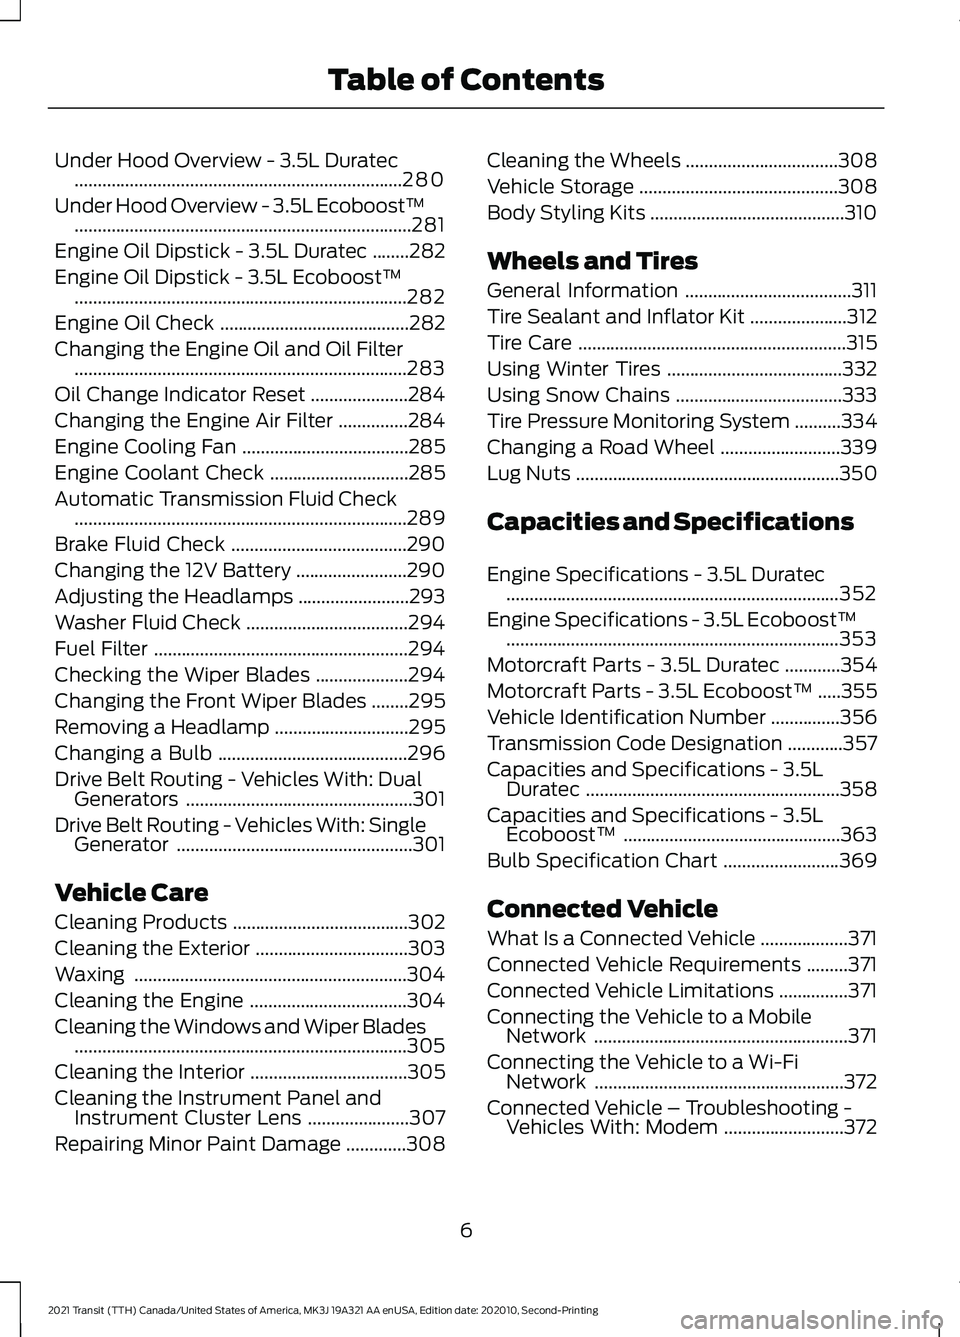 FORD TRANSIT 2021  Owners Manual Under Hood Overview - 3.5L Duratec
.......................................................................280
Under Hood Overview - 3.5L Ecoboost™ ...................................................